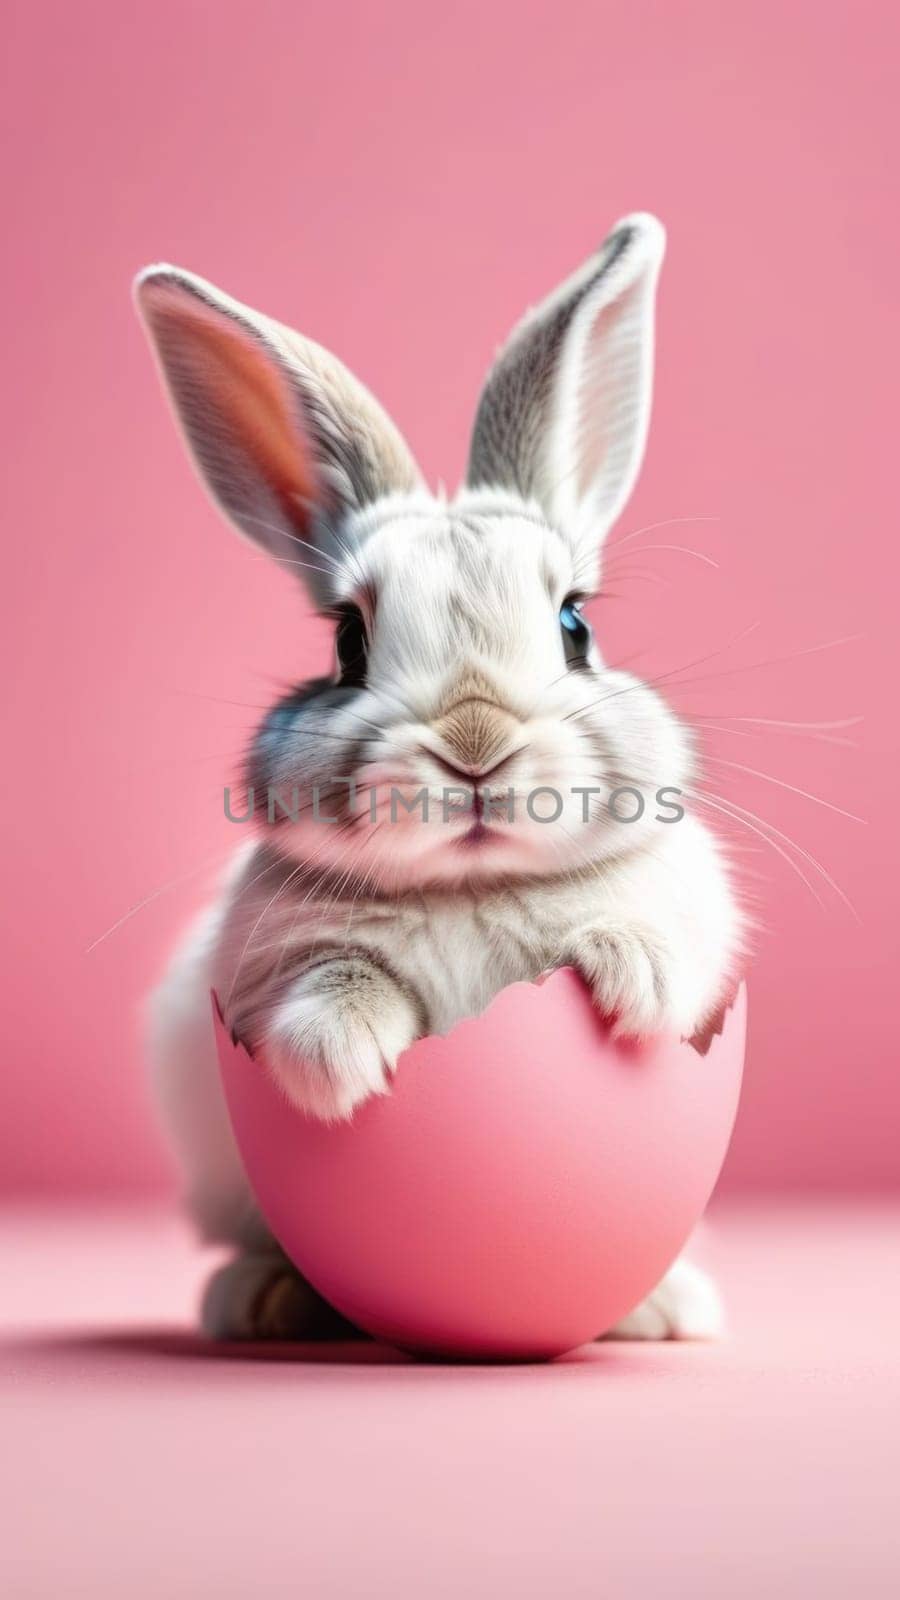 Happy Easter banner with cute Easter bunny hatching from pink Easter egg on pastel pink background. Illustration of Easter rabbit sitting in cracked eggshell. Happy Easter greeting card. Copy space